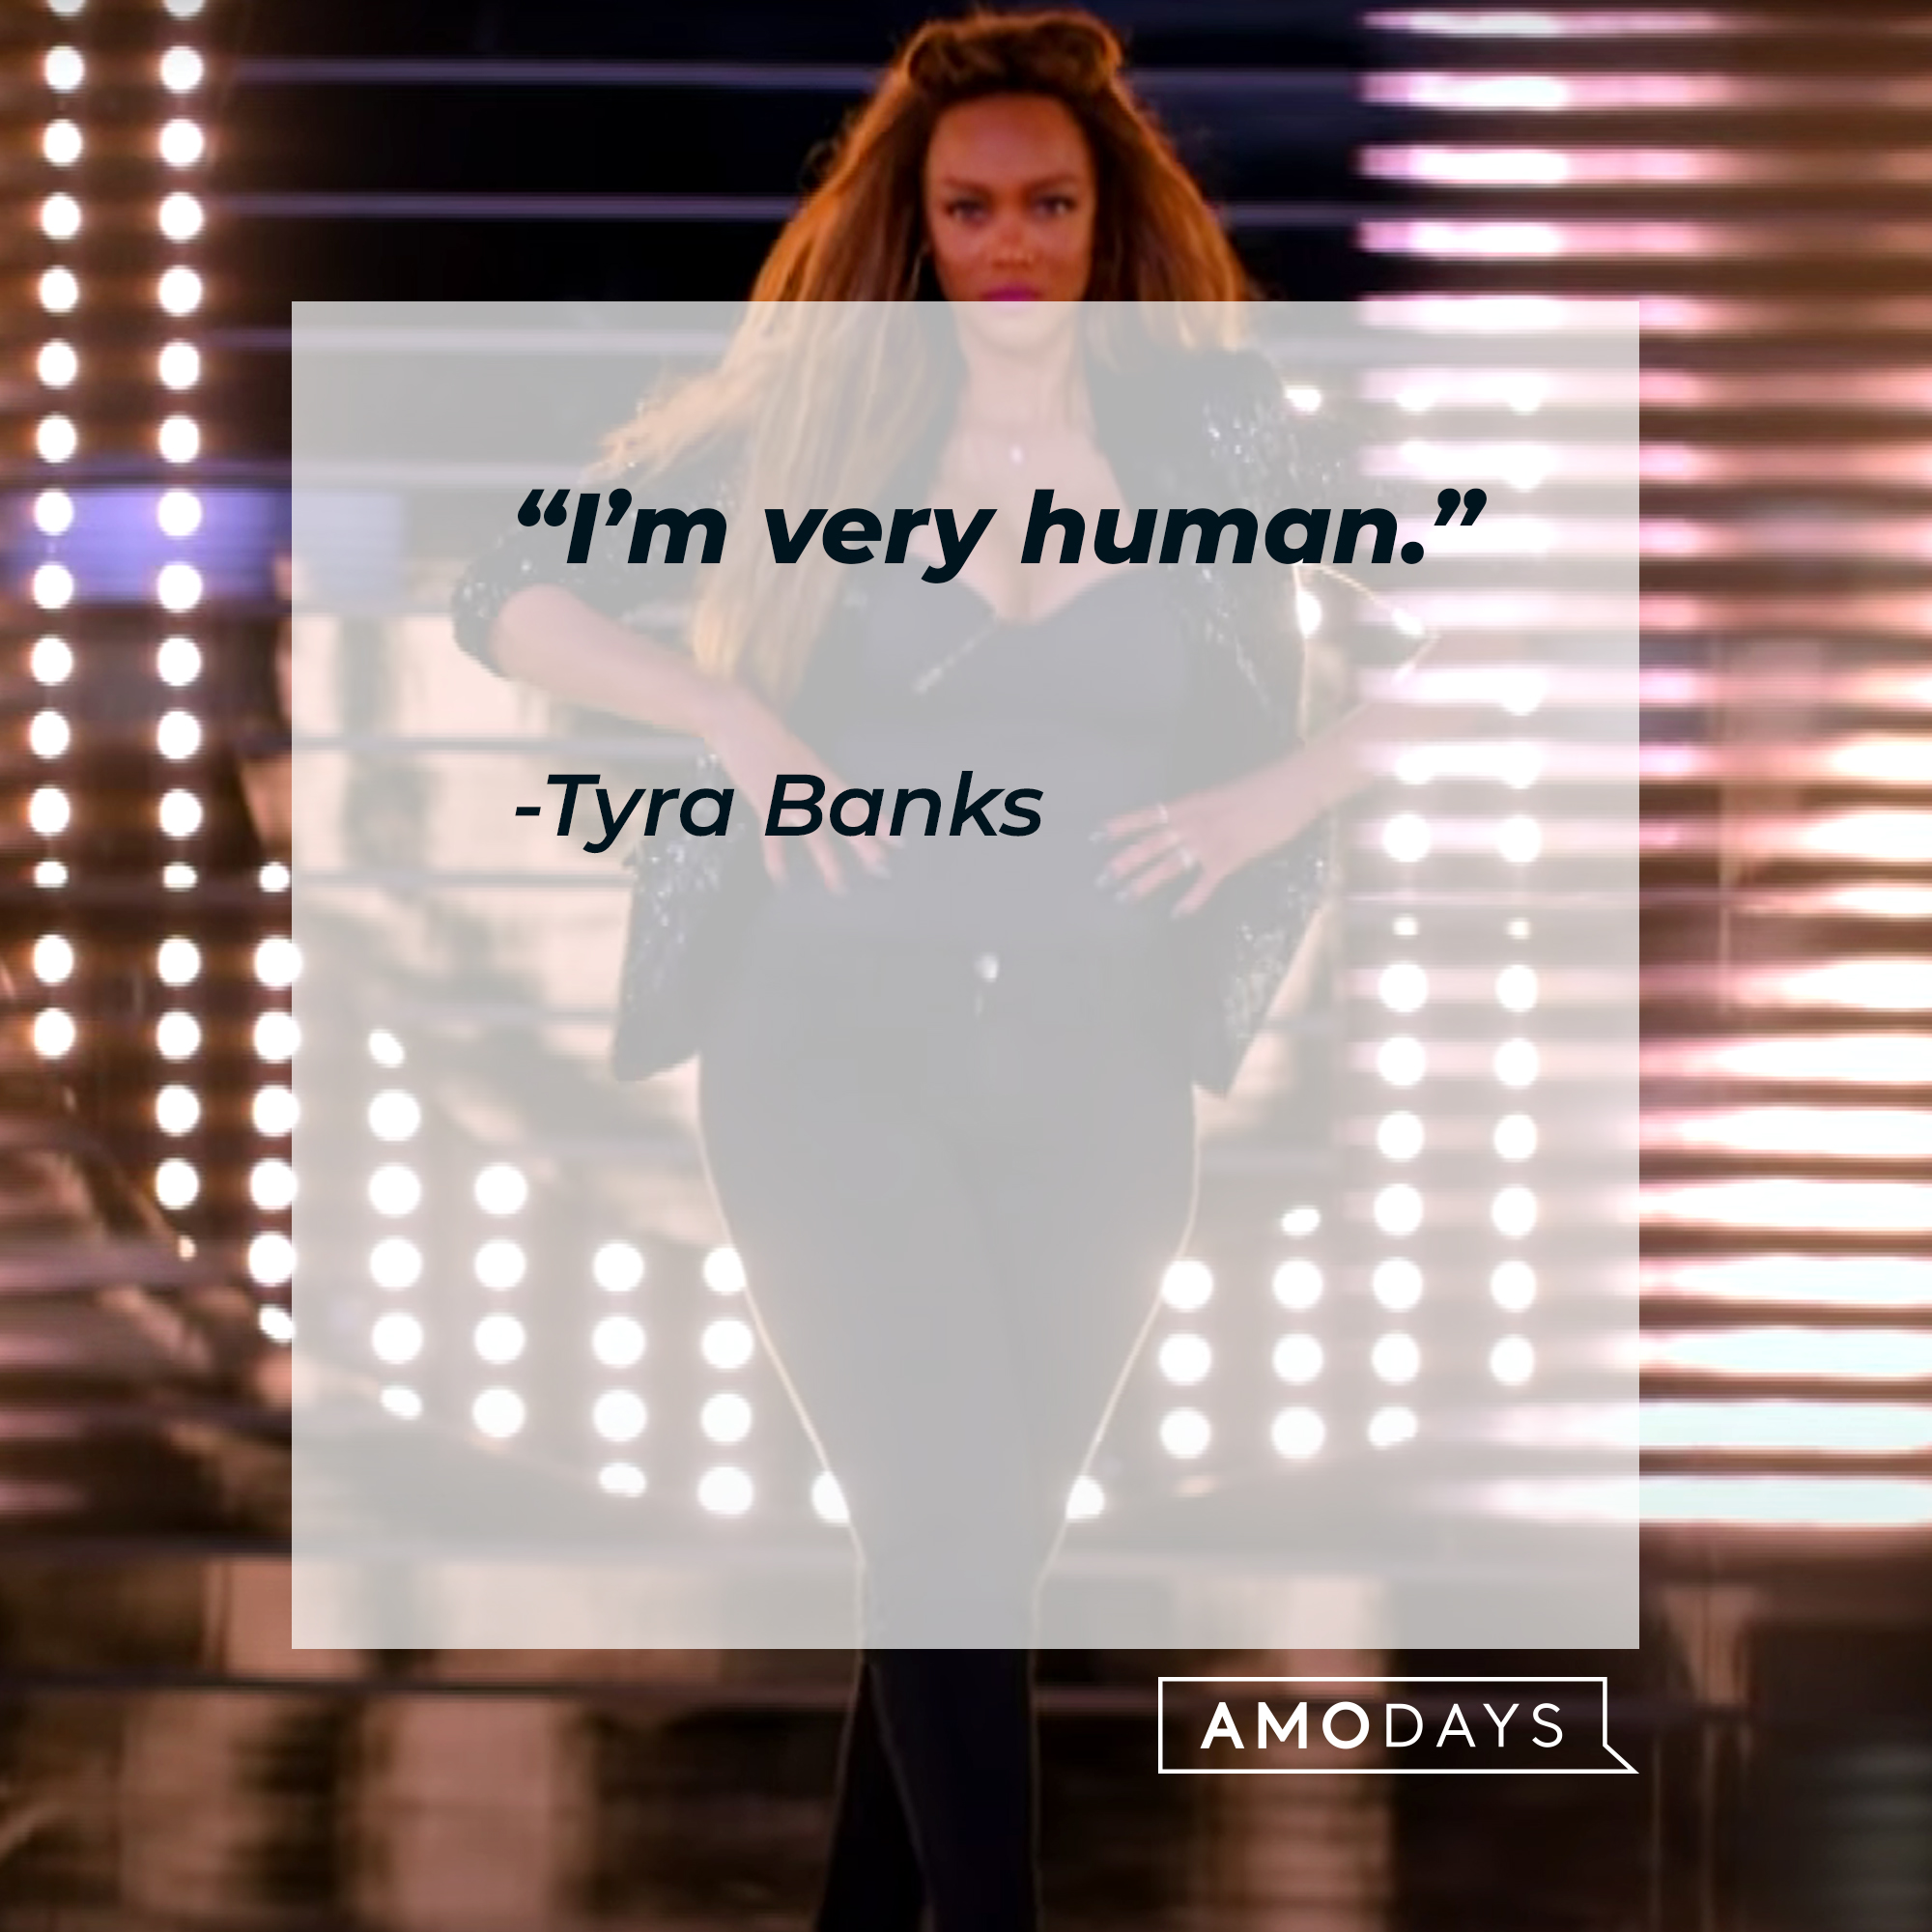 Tyra Banks' quote: "I'm very human." | Source: Getty Images